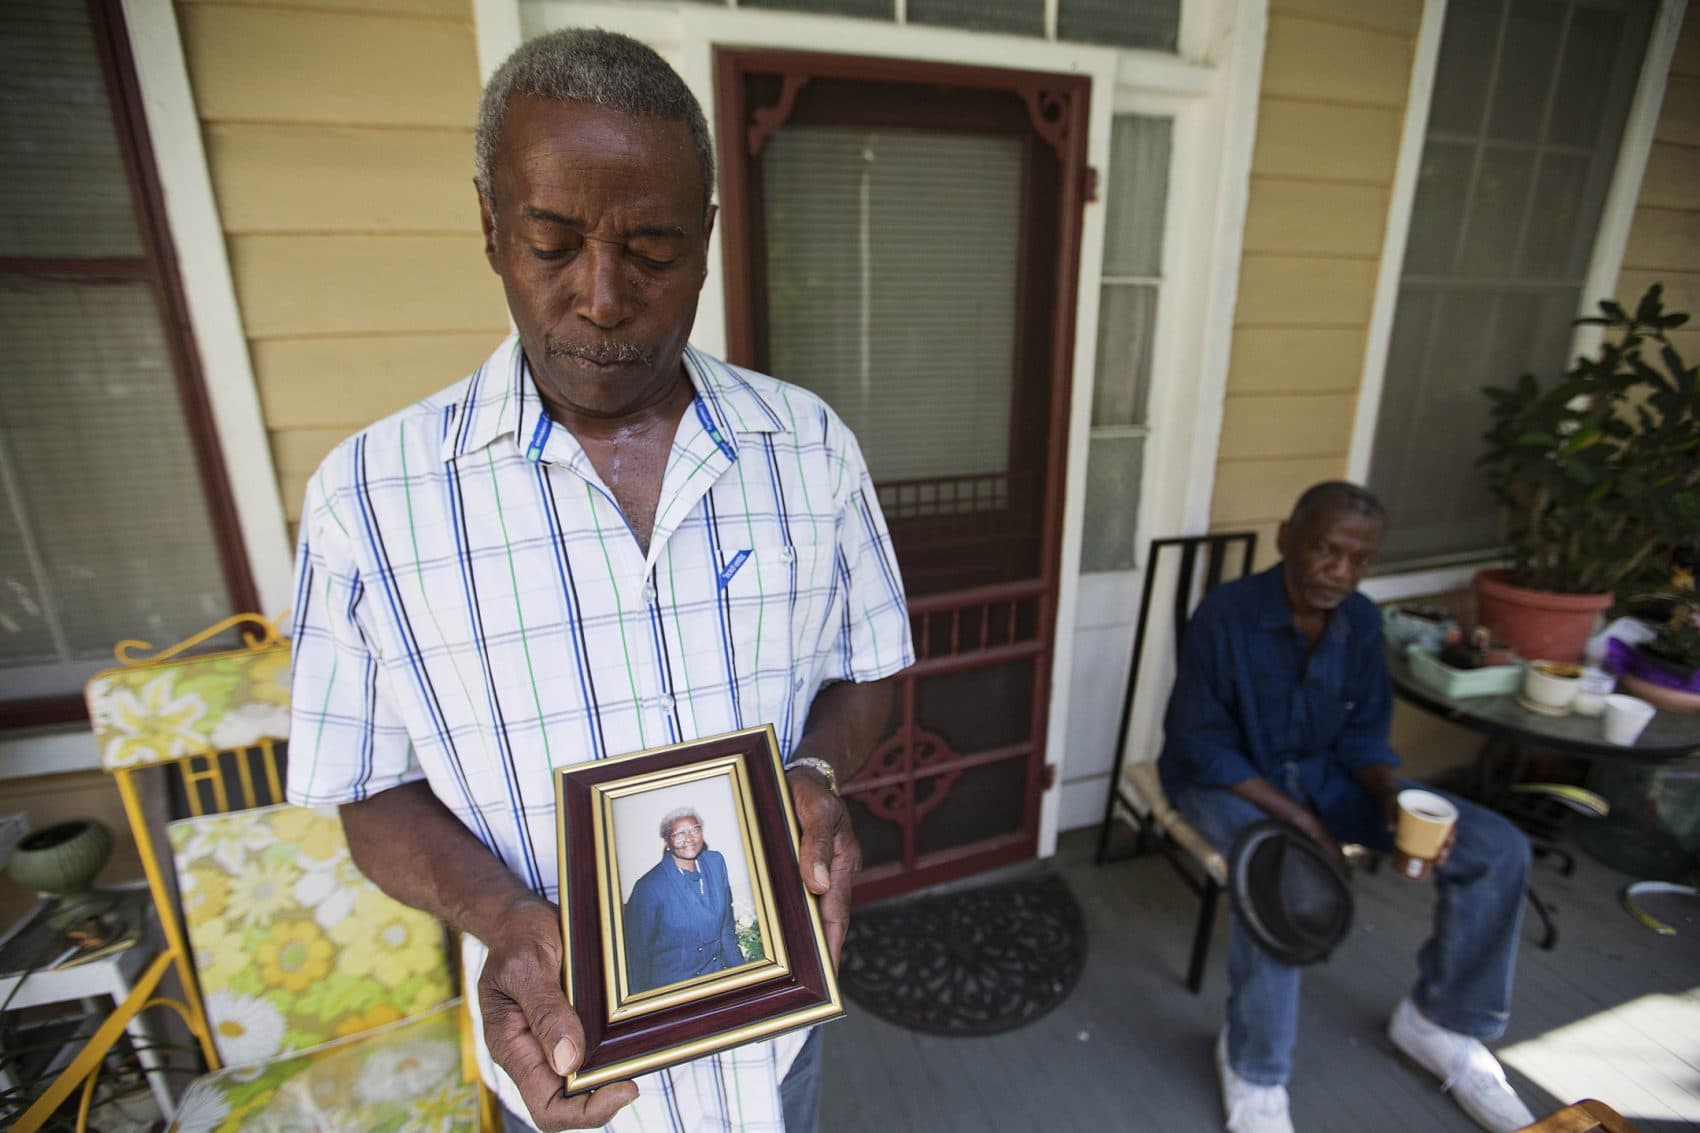 Walter Jackson, left, holds a photo of his mother Susie Jackson, one of the nine people killed in Wednesday's shooting at Emanuel AME Church, while standing for a portrait on his front porch as his cousin Kenneth Washington, right, looks on Friday, June 19, 2015, in Charleston, S.C. &quot;Right now all in my heart is anger for him,&quot; said Jackson. &quot;I doubt if I'll ever forgive him.&quot; (David Goldman/AP)